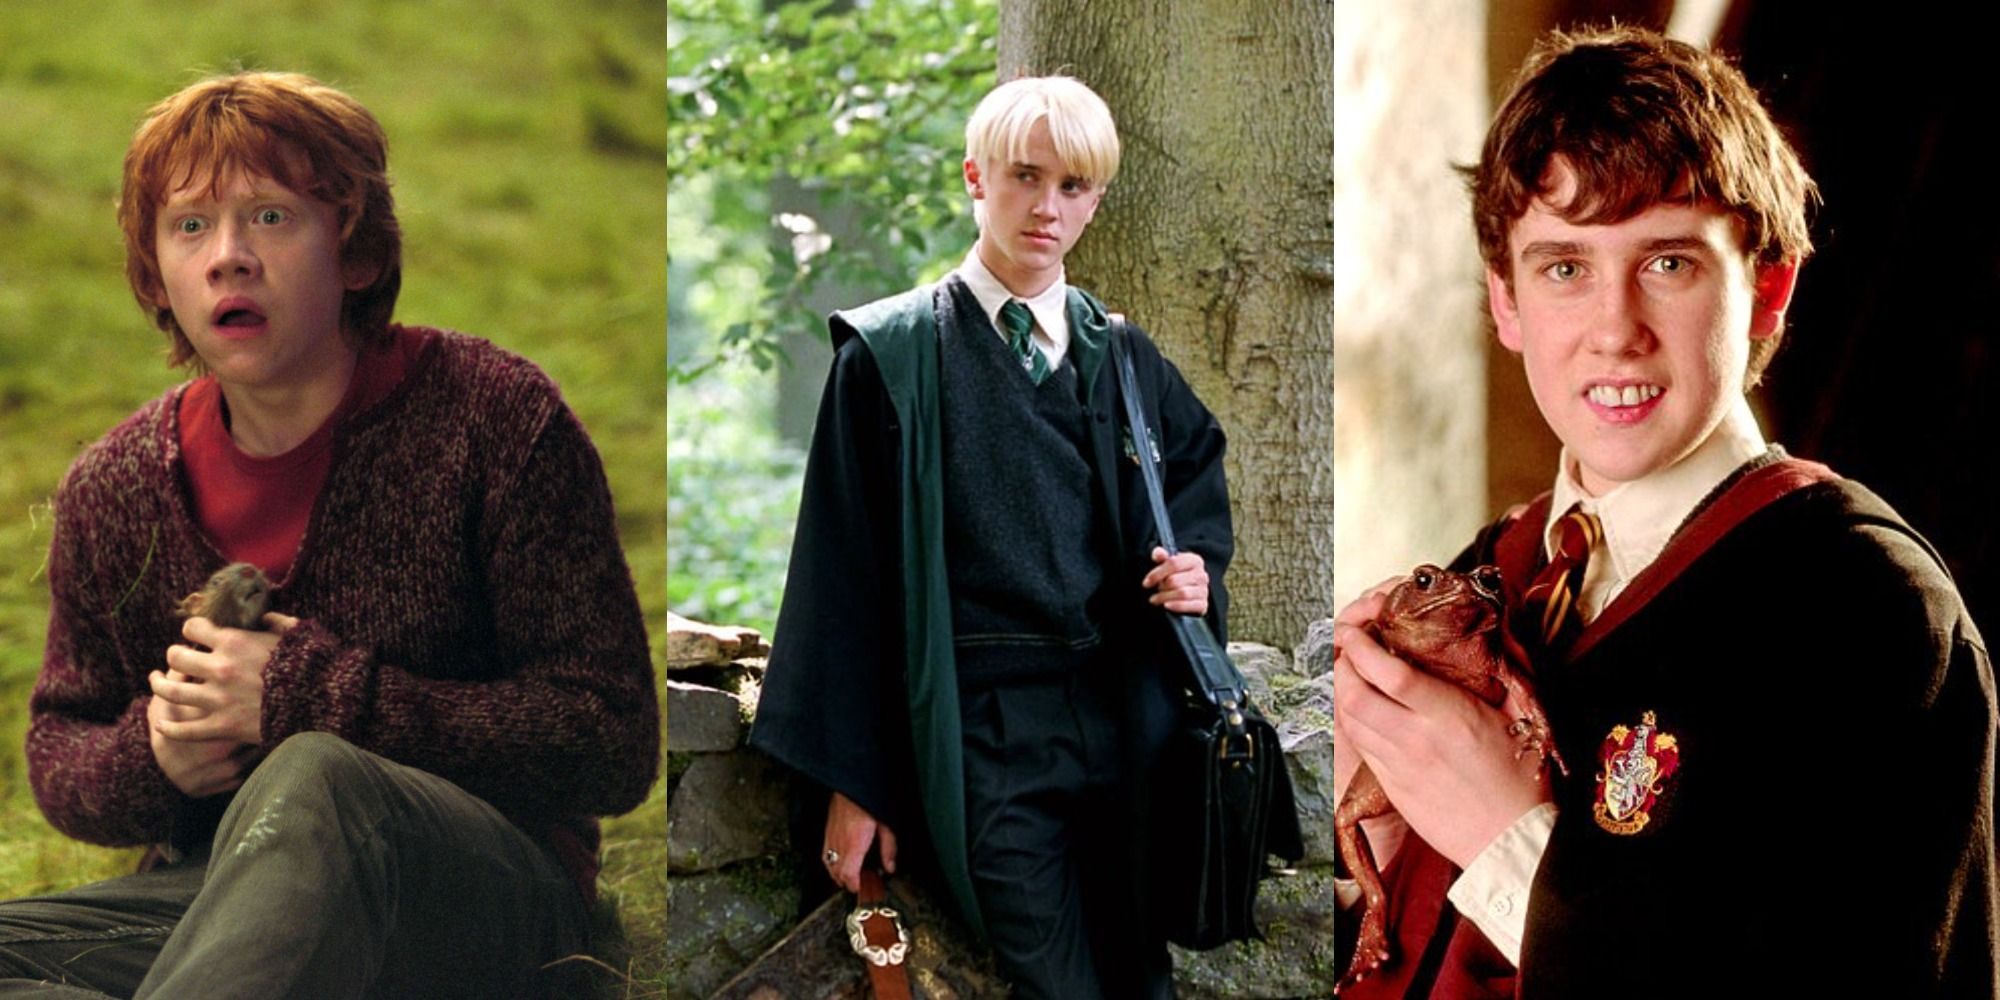 Split image of Ron Weasley sitting, Draco standing, & Neville posing in the Harry Potter films.